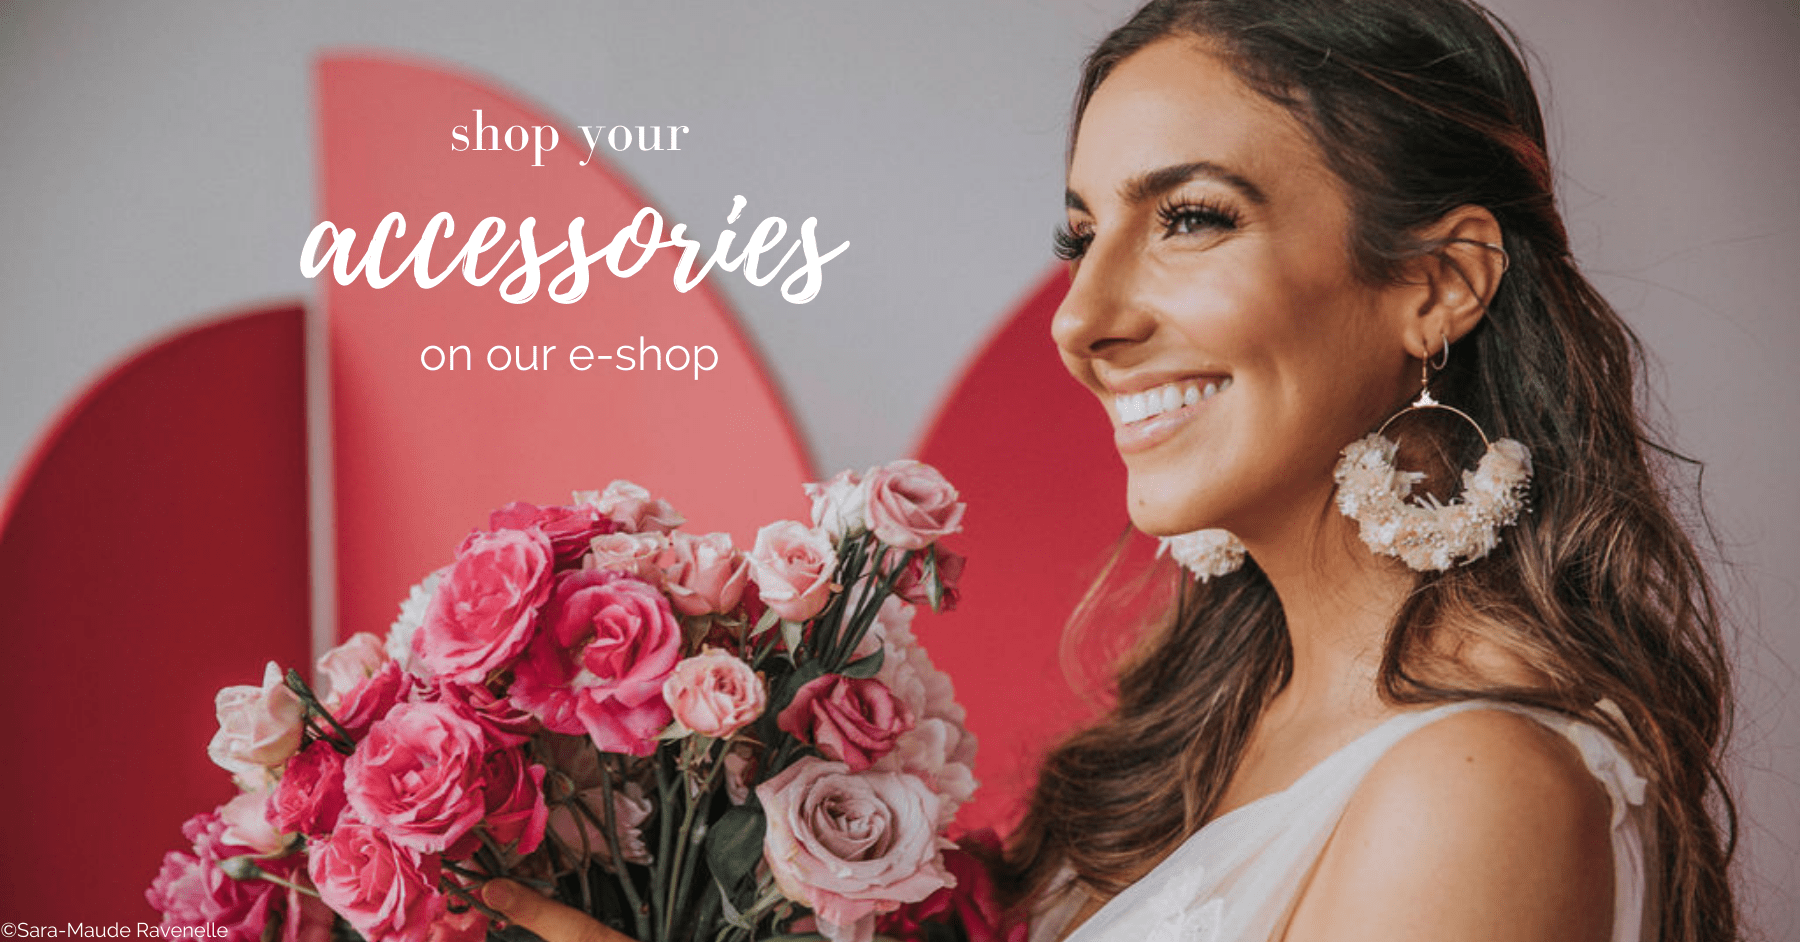 Shop our accessories - Dream It Yourself